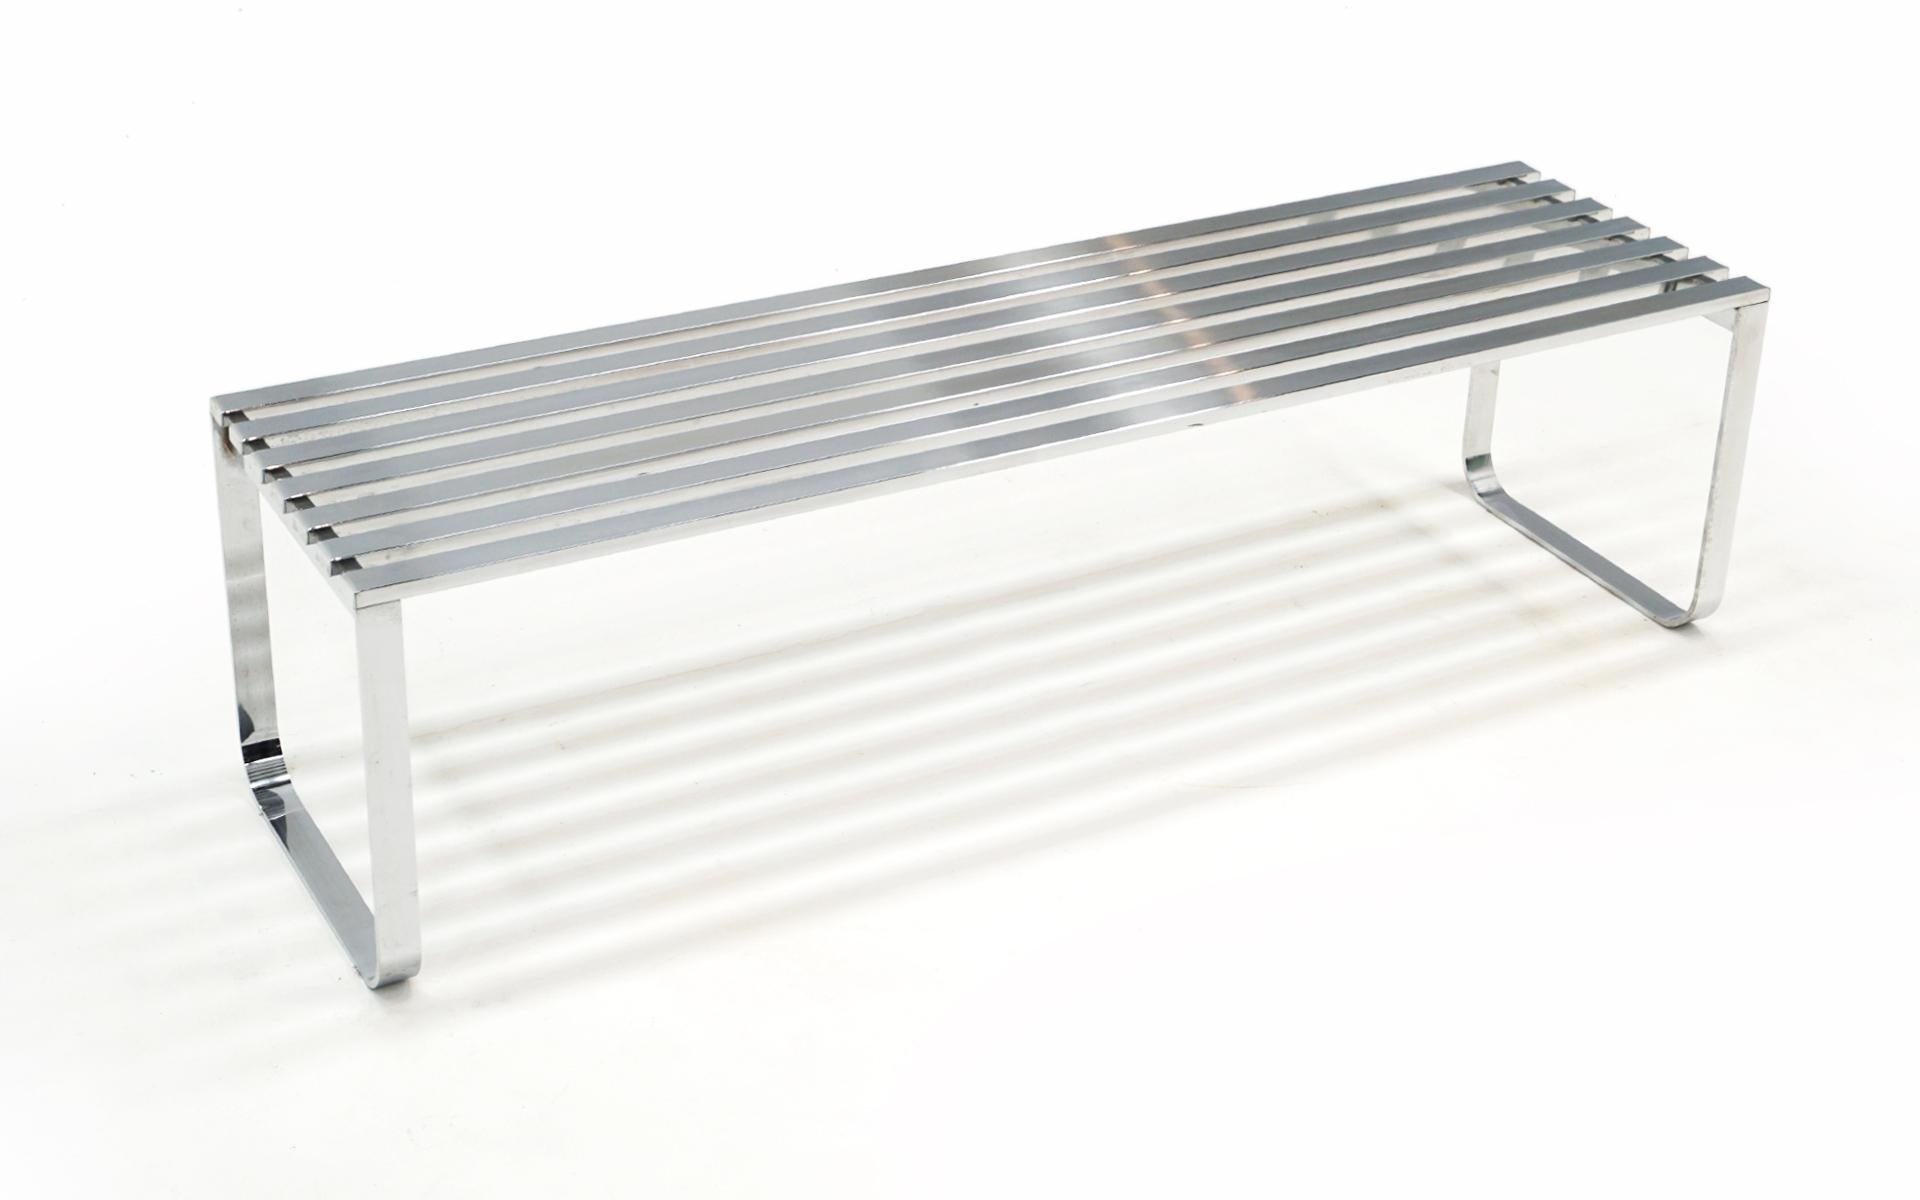 Mid-Century Modern Chrome Bench / Coffee Table by Design Institute of America